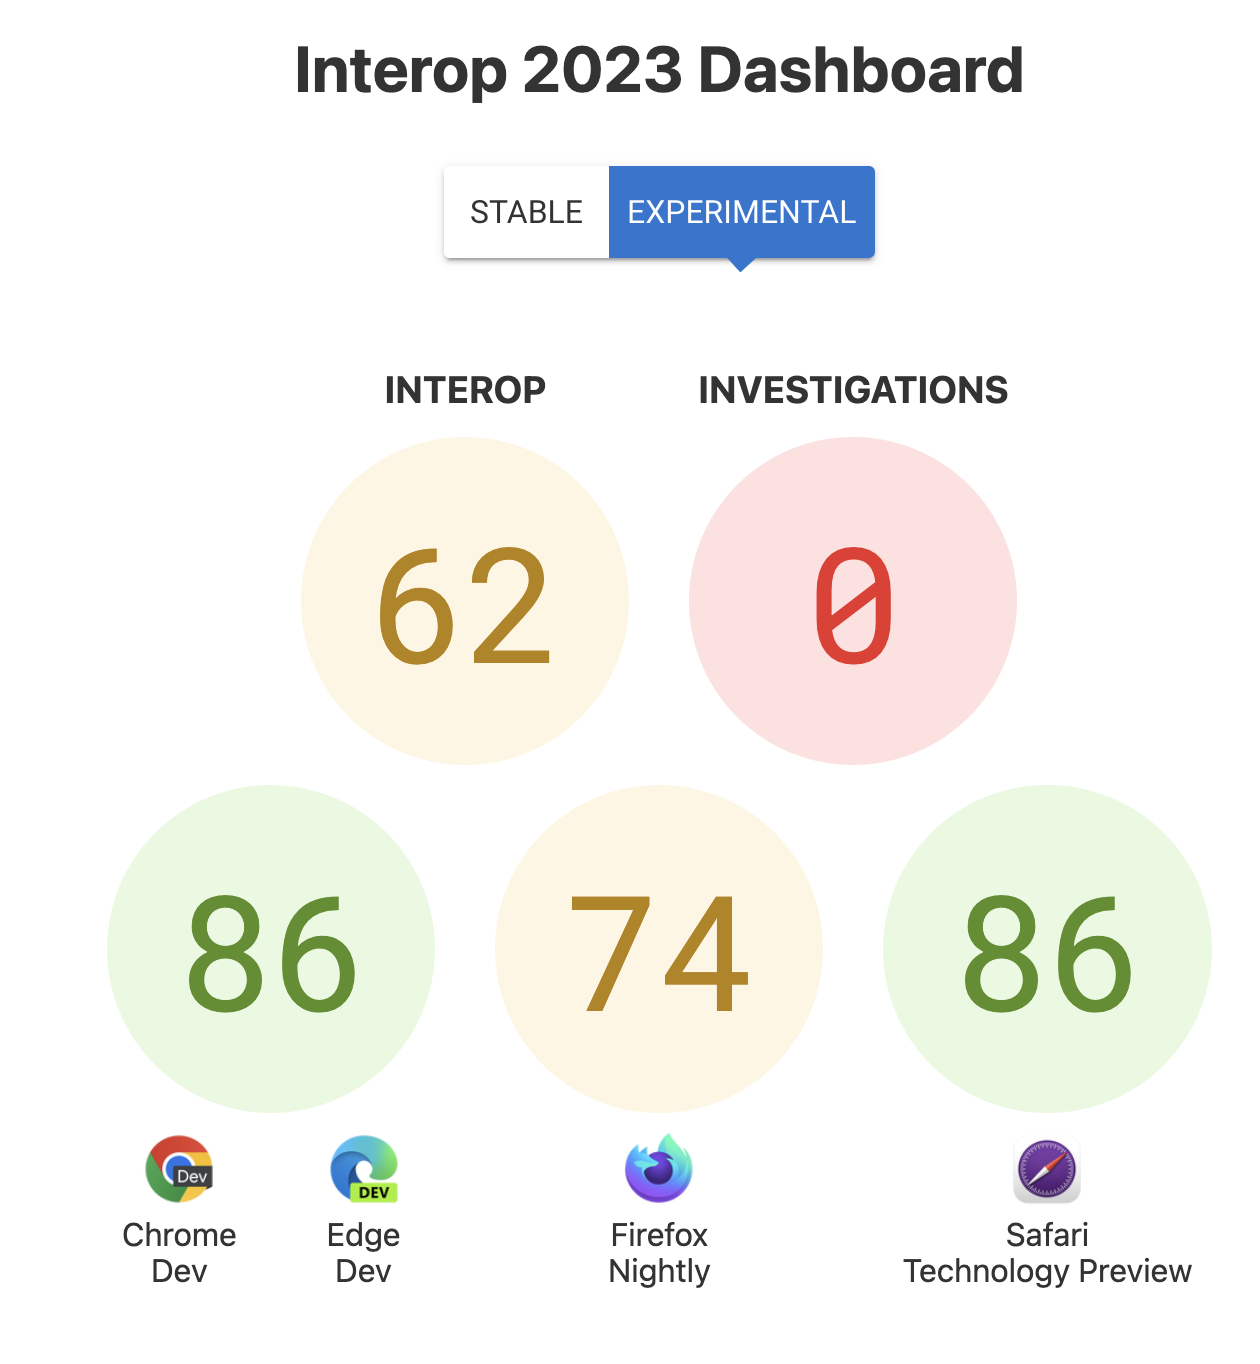 The Scores for Interop overall: 62, Investigations: 0, and the scores per browser - 86 for Chrome and Edge, 74 for Firefox, 86 for Safari Technology Preview.